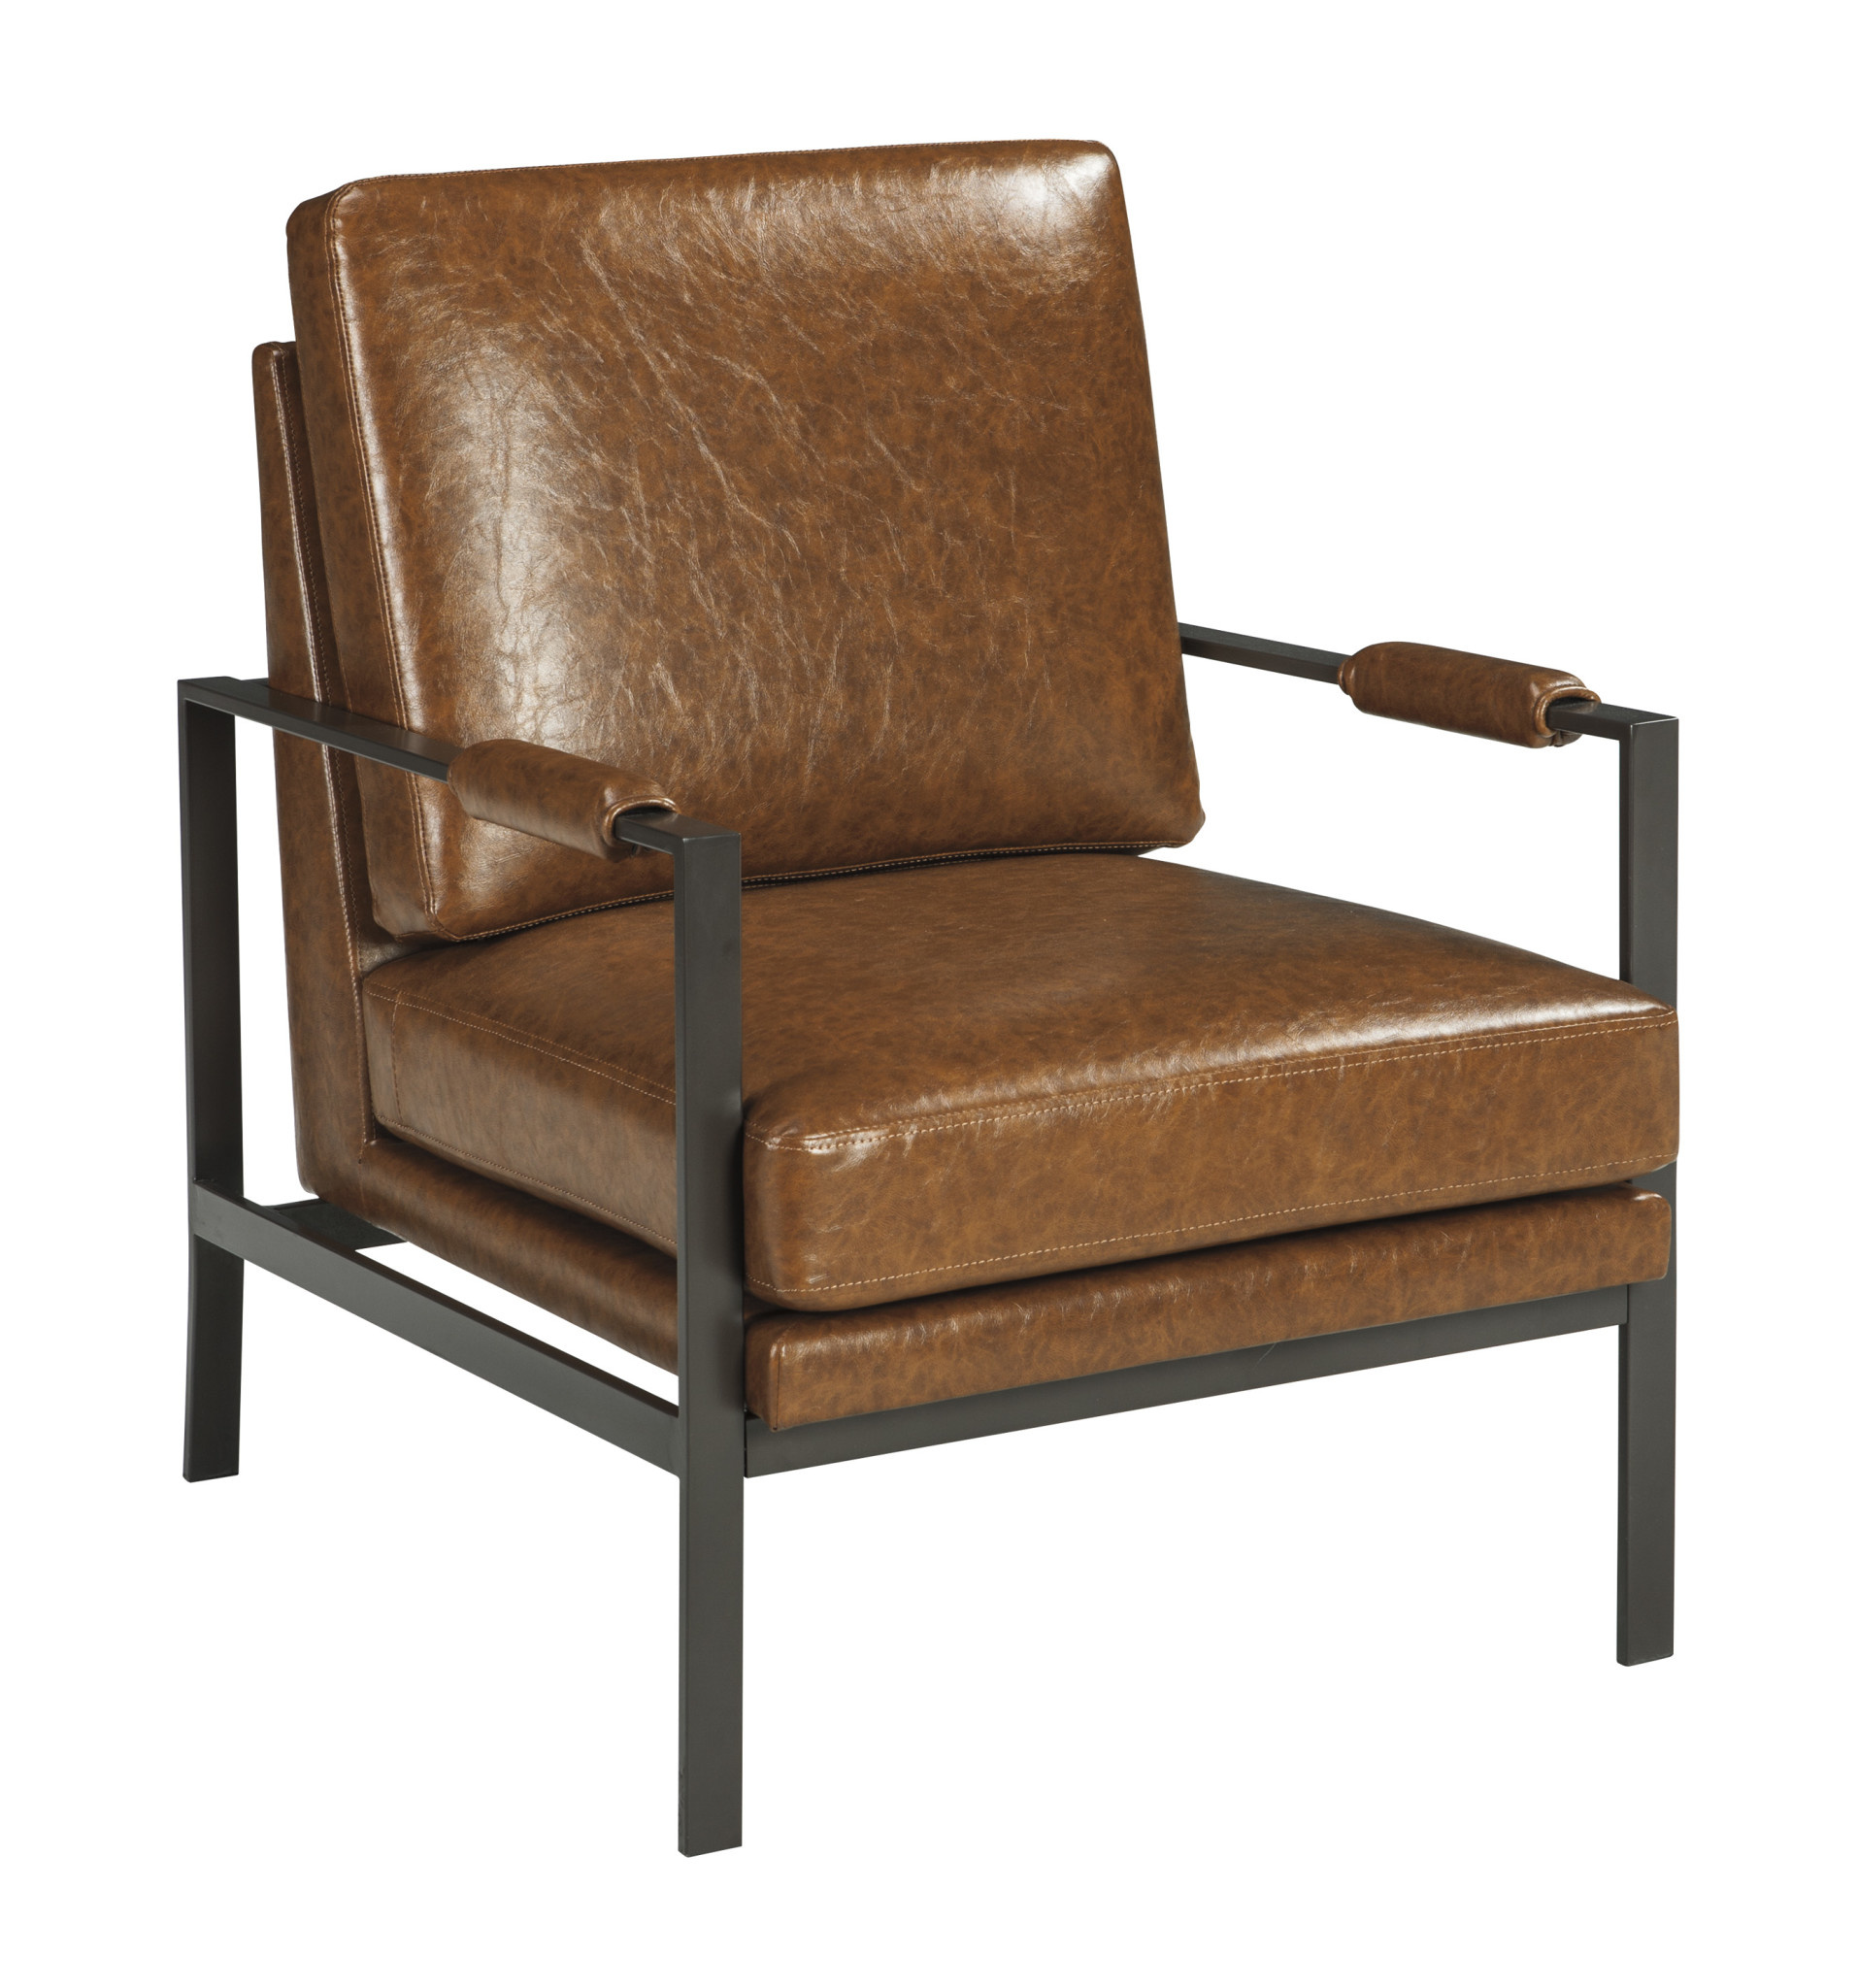 Signature Design "Peacemaker" Accent Chair- Brown- A3000029